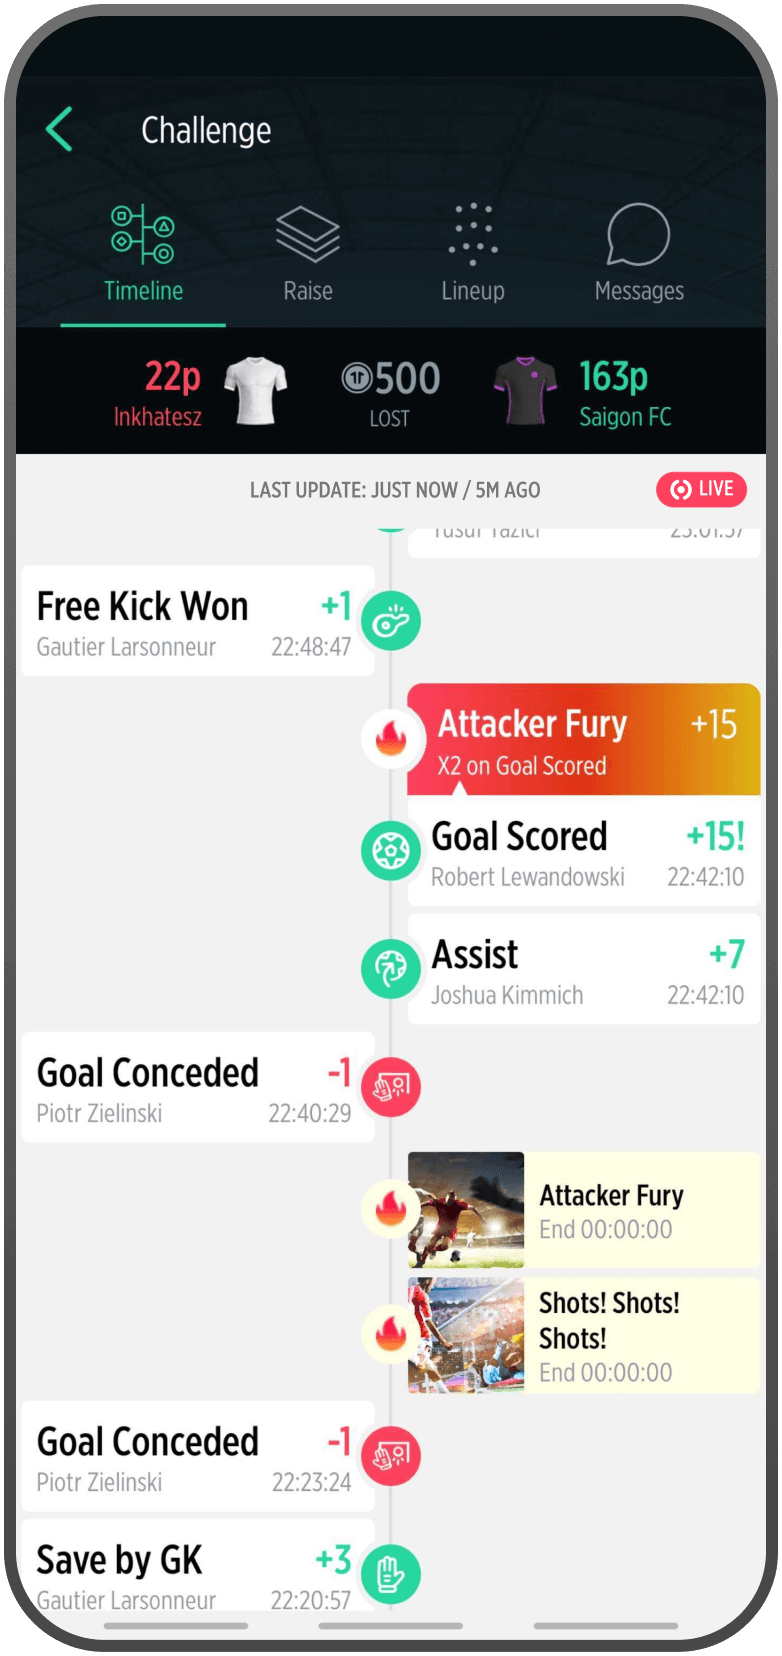 TrophyRoom - The Fantasy Football Game - Real Time Match Action